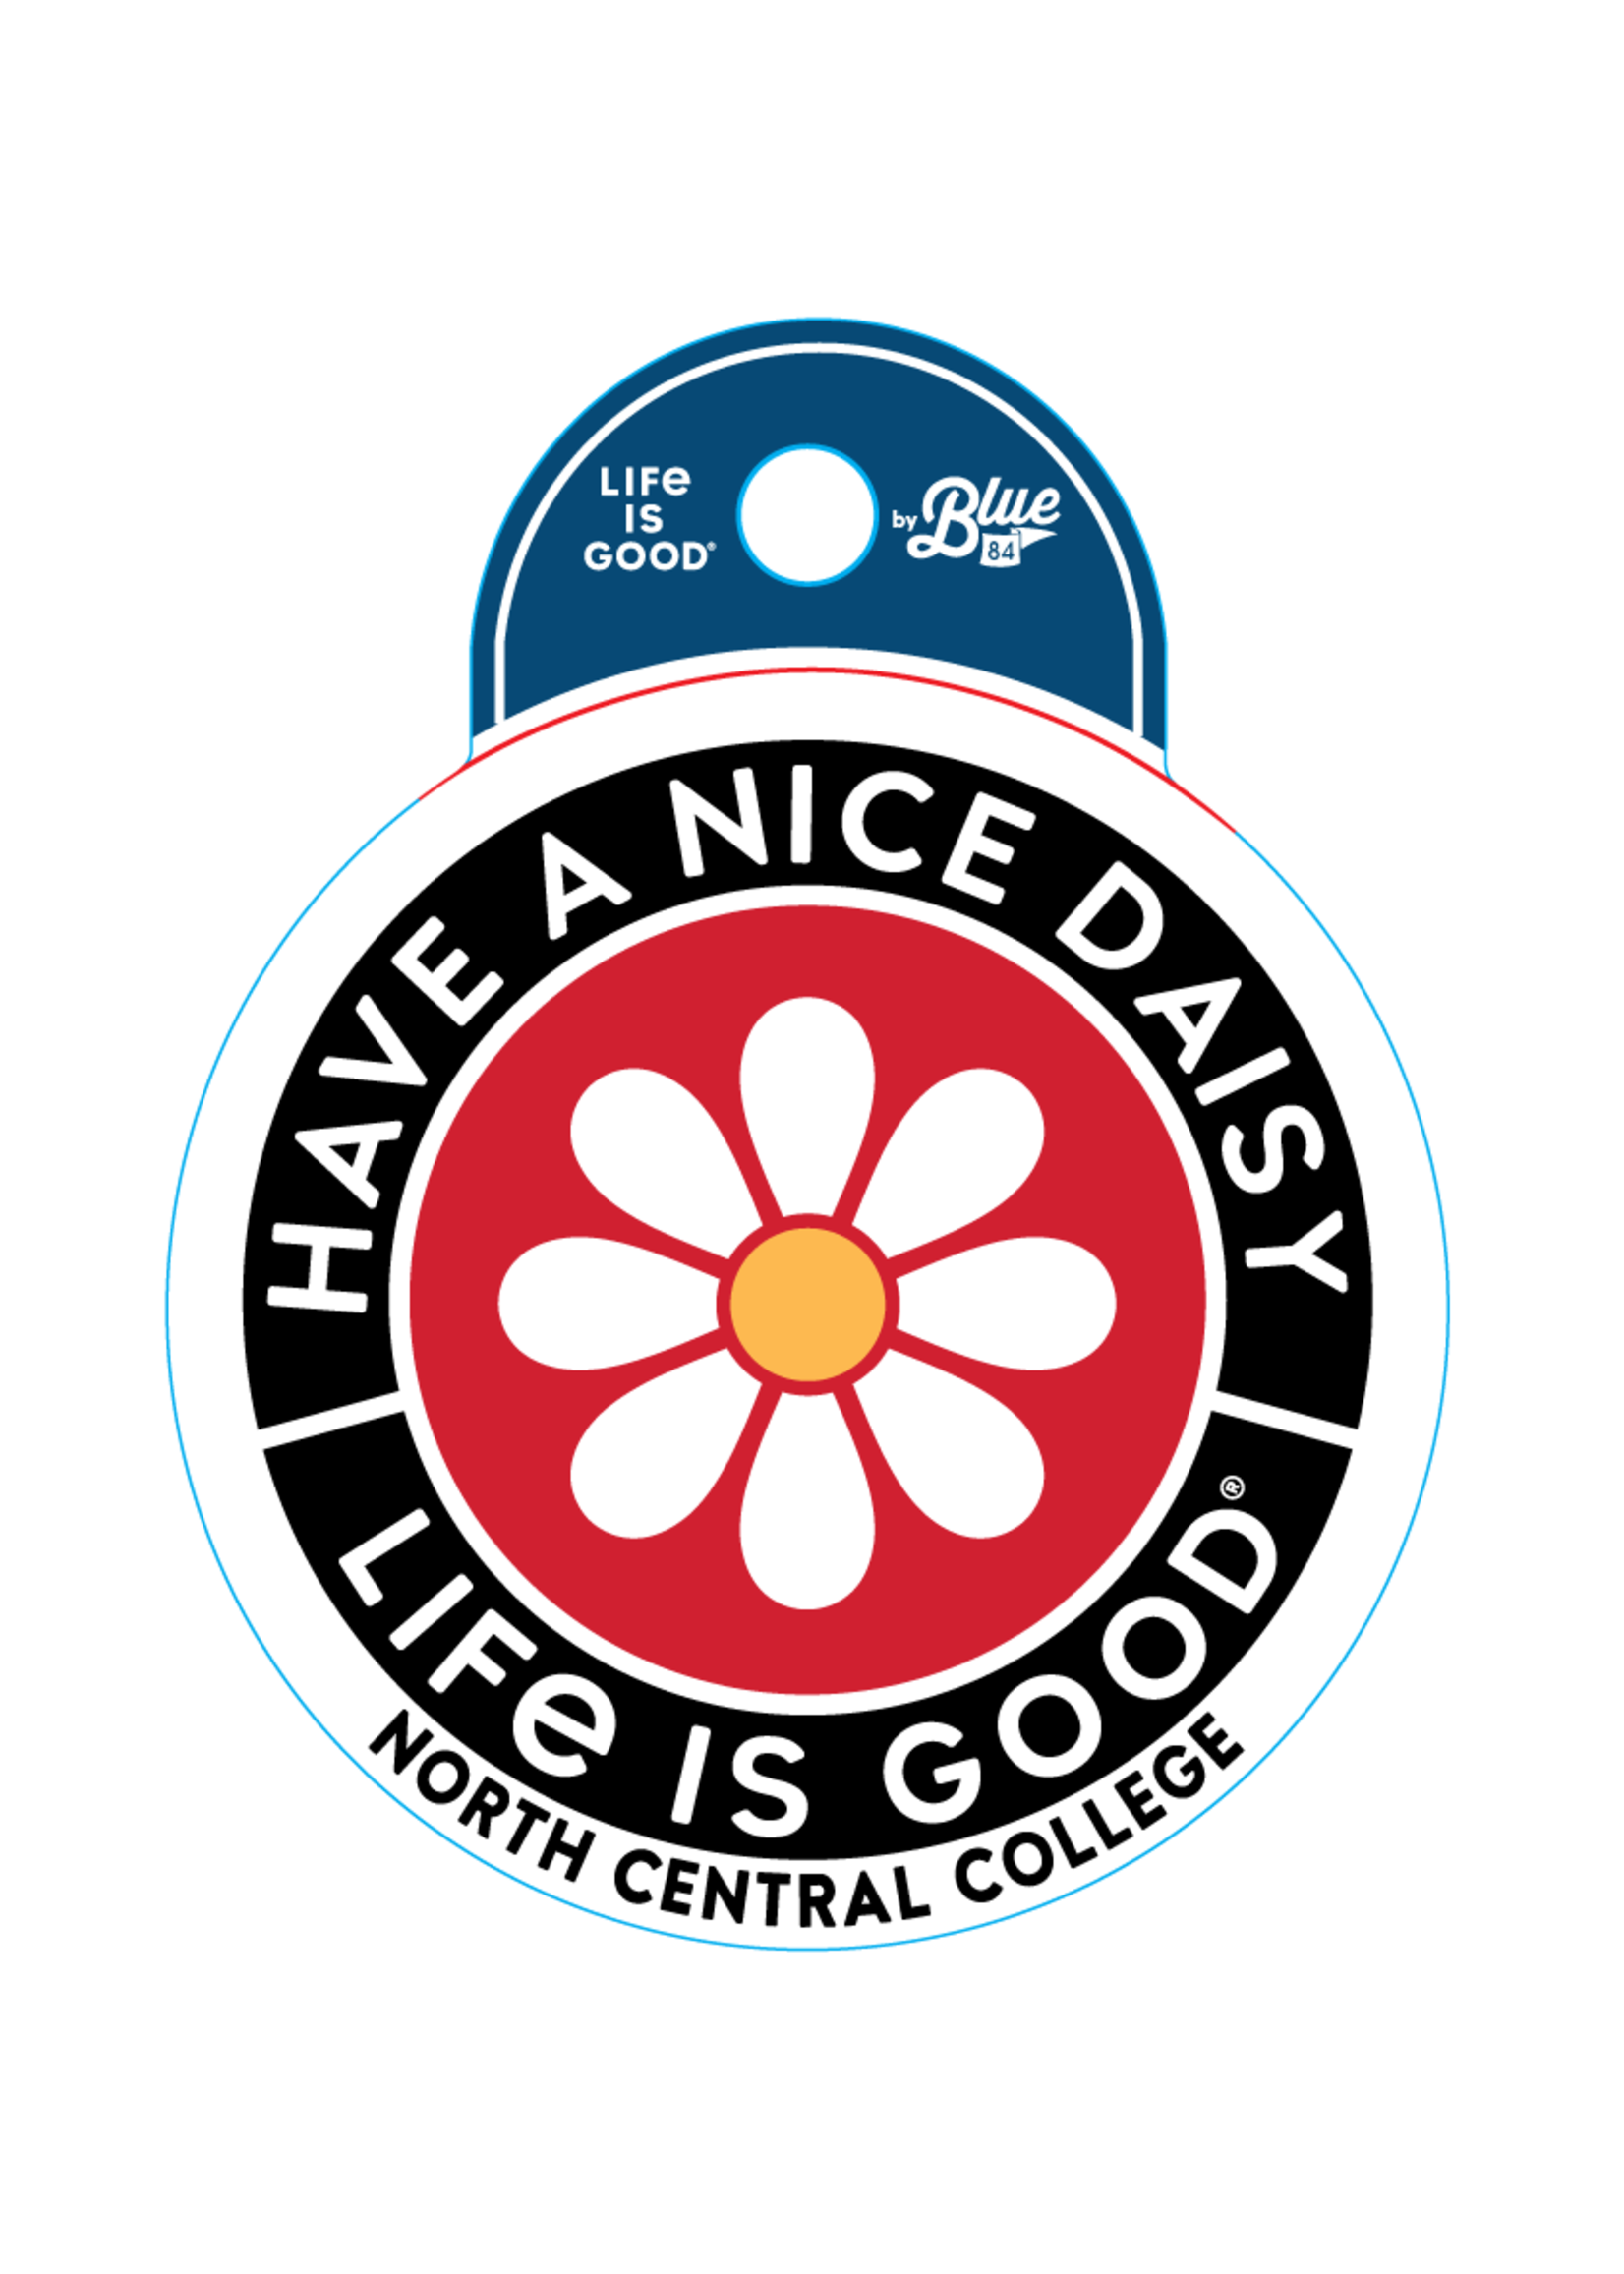 Blue 84 NCC Life is Good Daisy Sticker by Blue 84